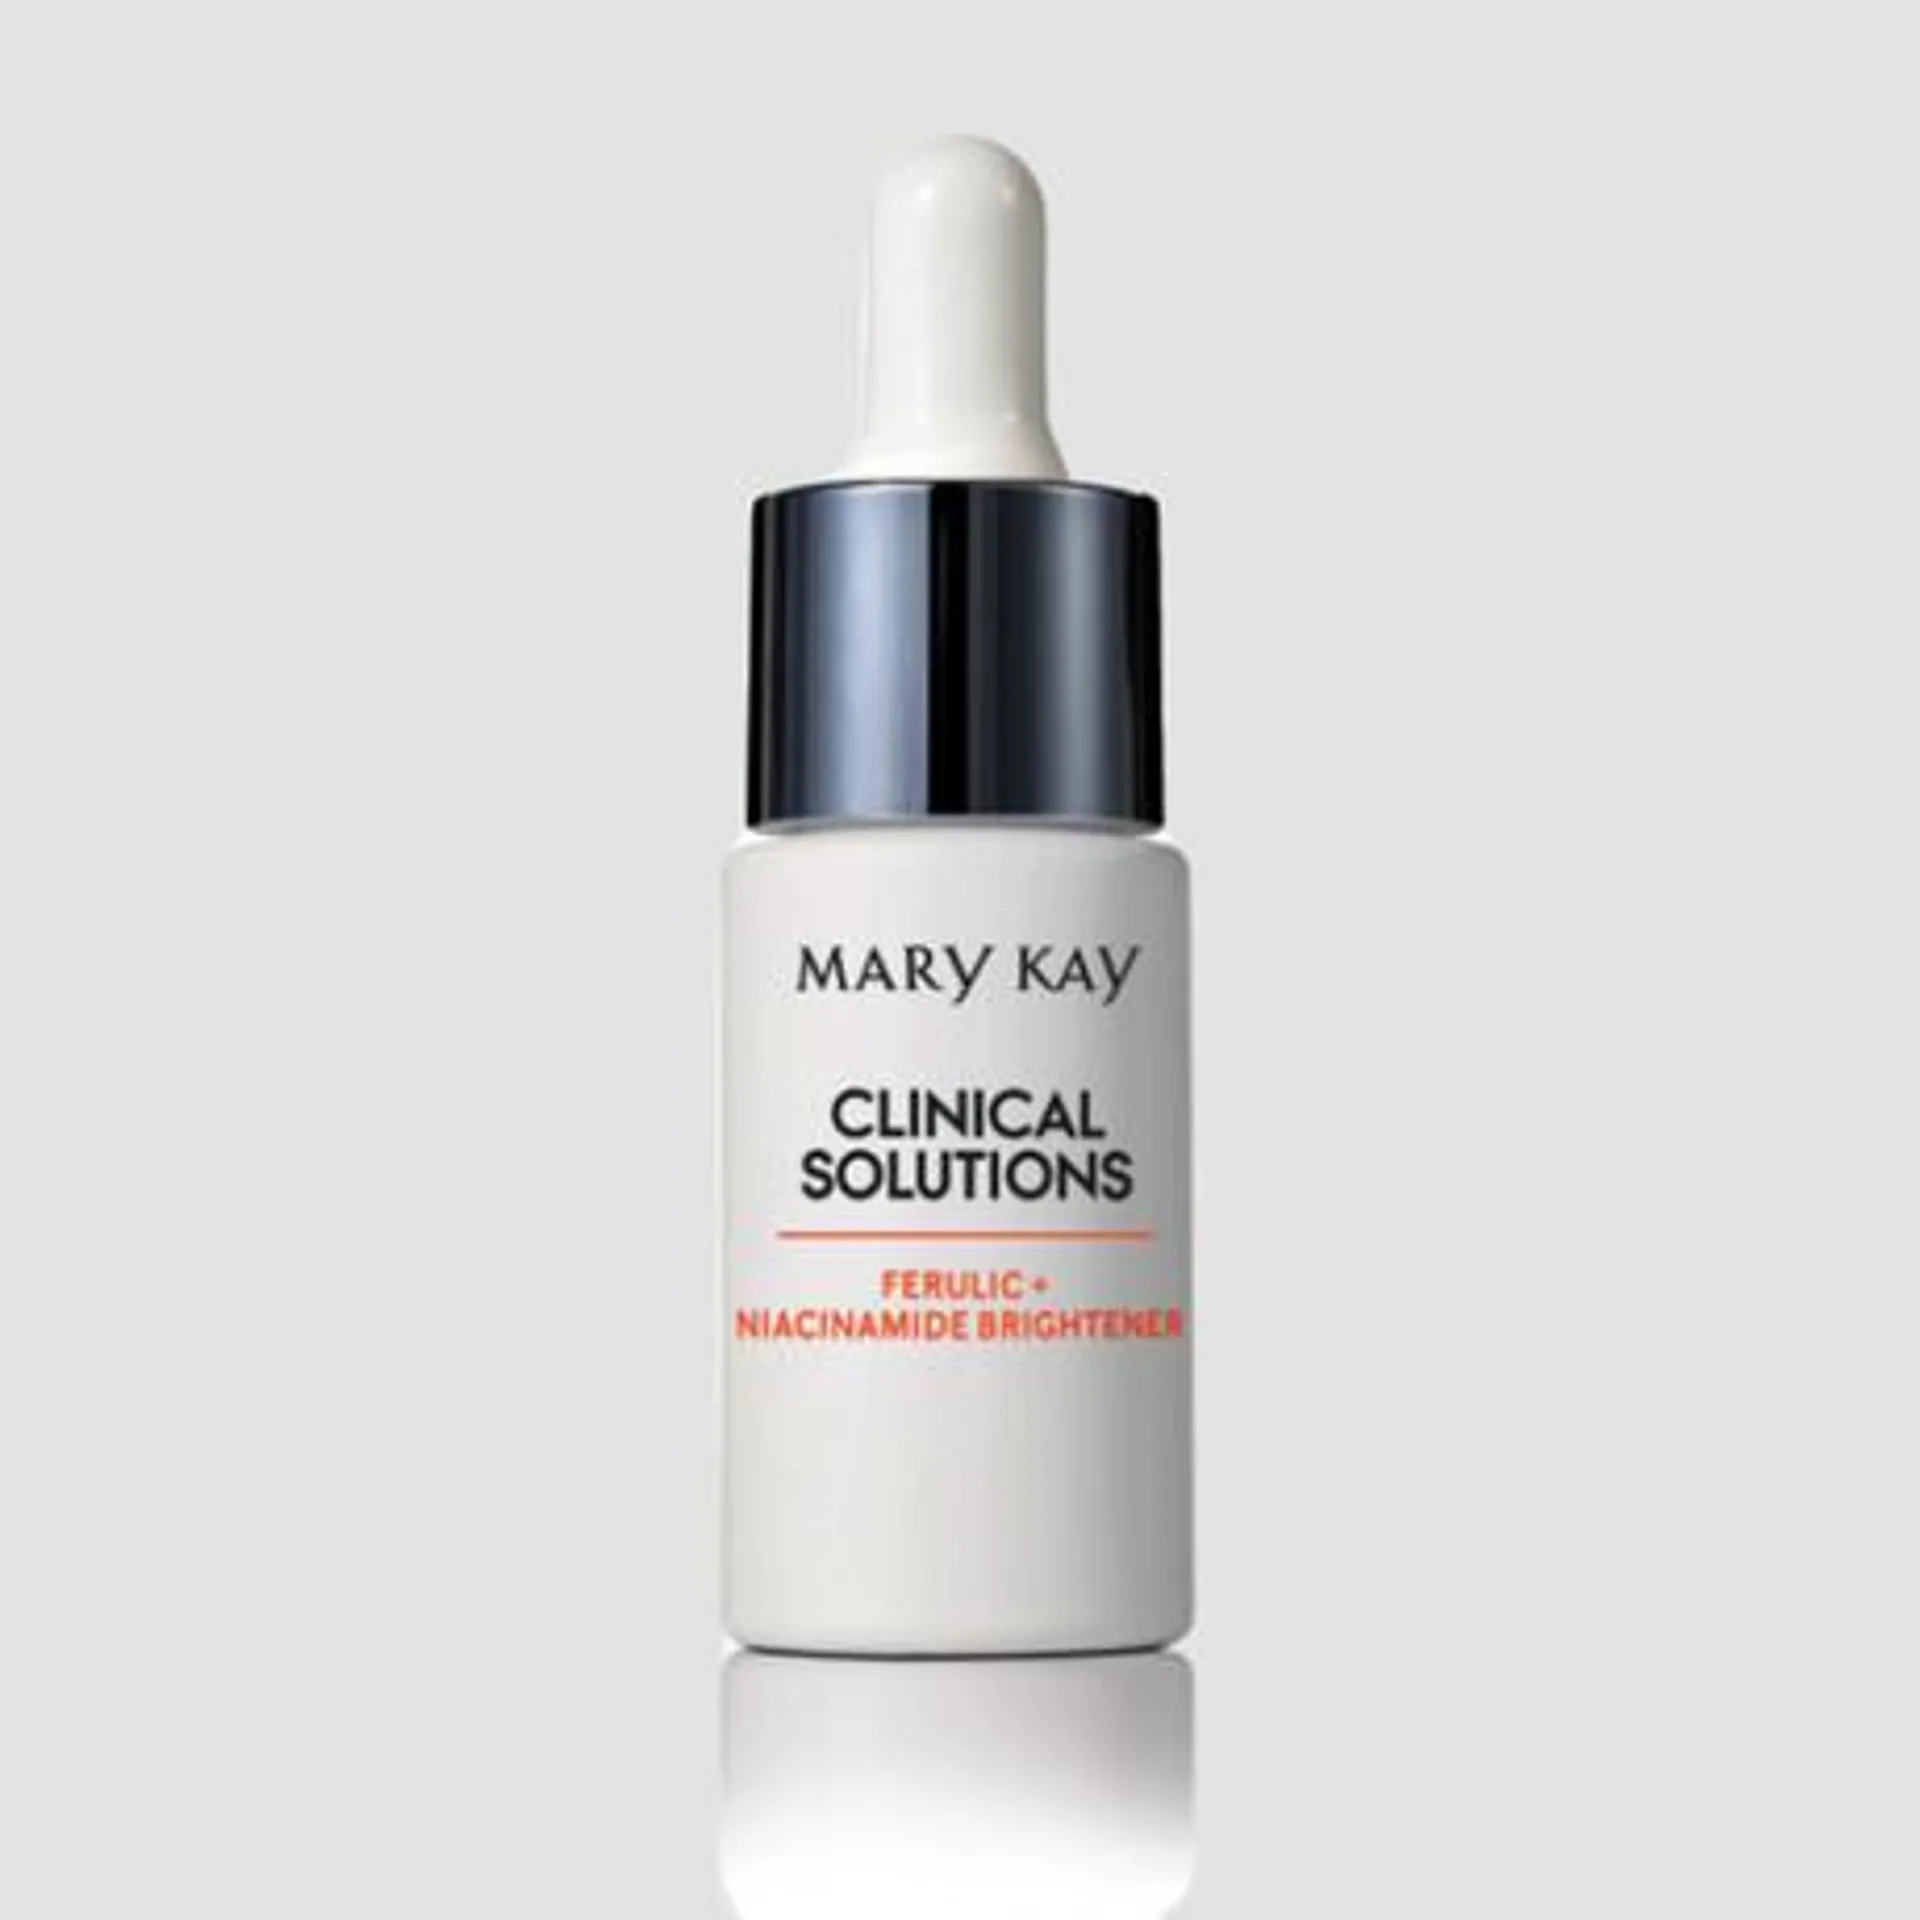 Mary Kay Clinical Solutions™ Ferulic + Niacinamide Brightener